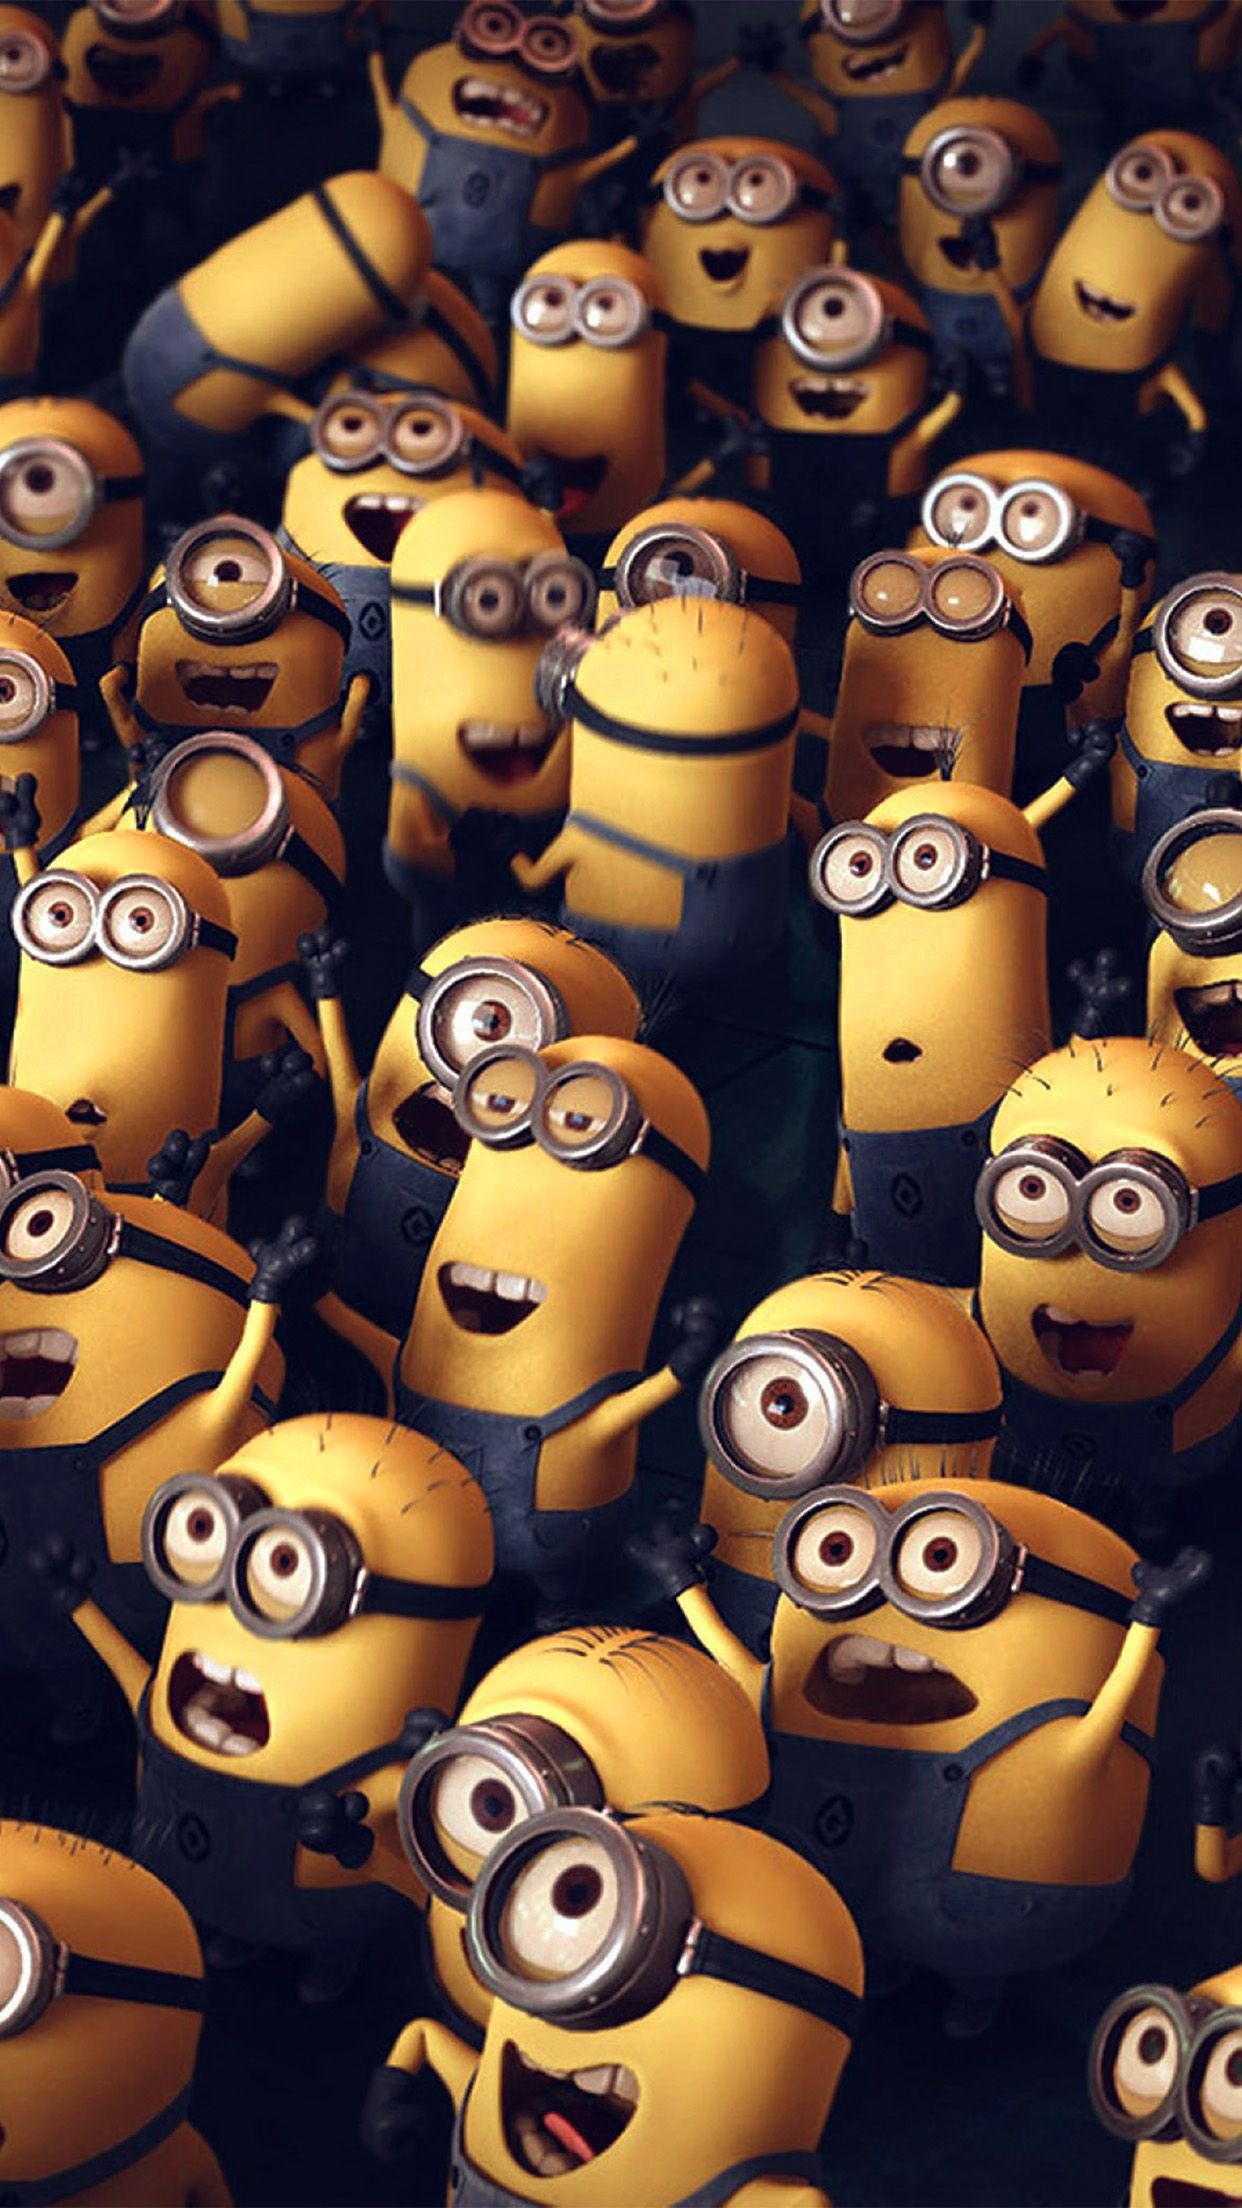 Minions Wallpaper HD | Minions wallpaper, Minion wallpaper hd, Hd wallpapers  for pc